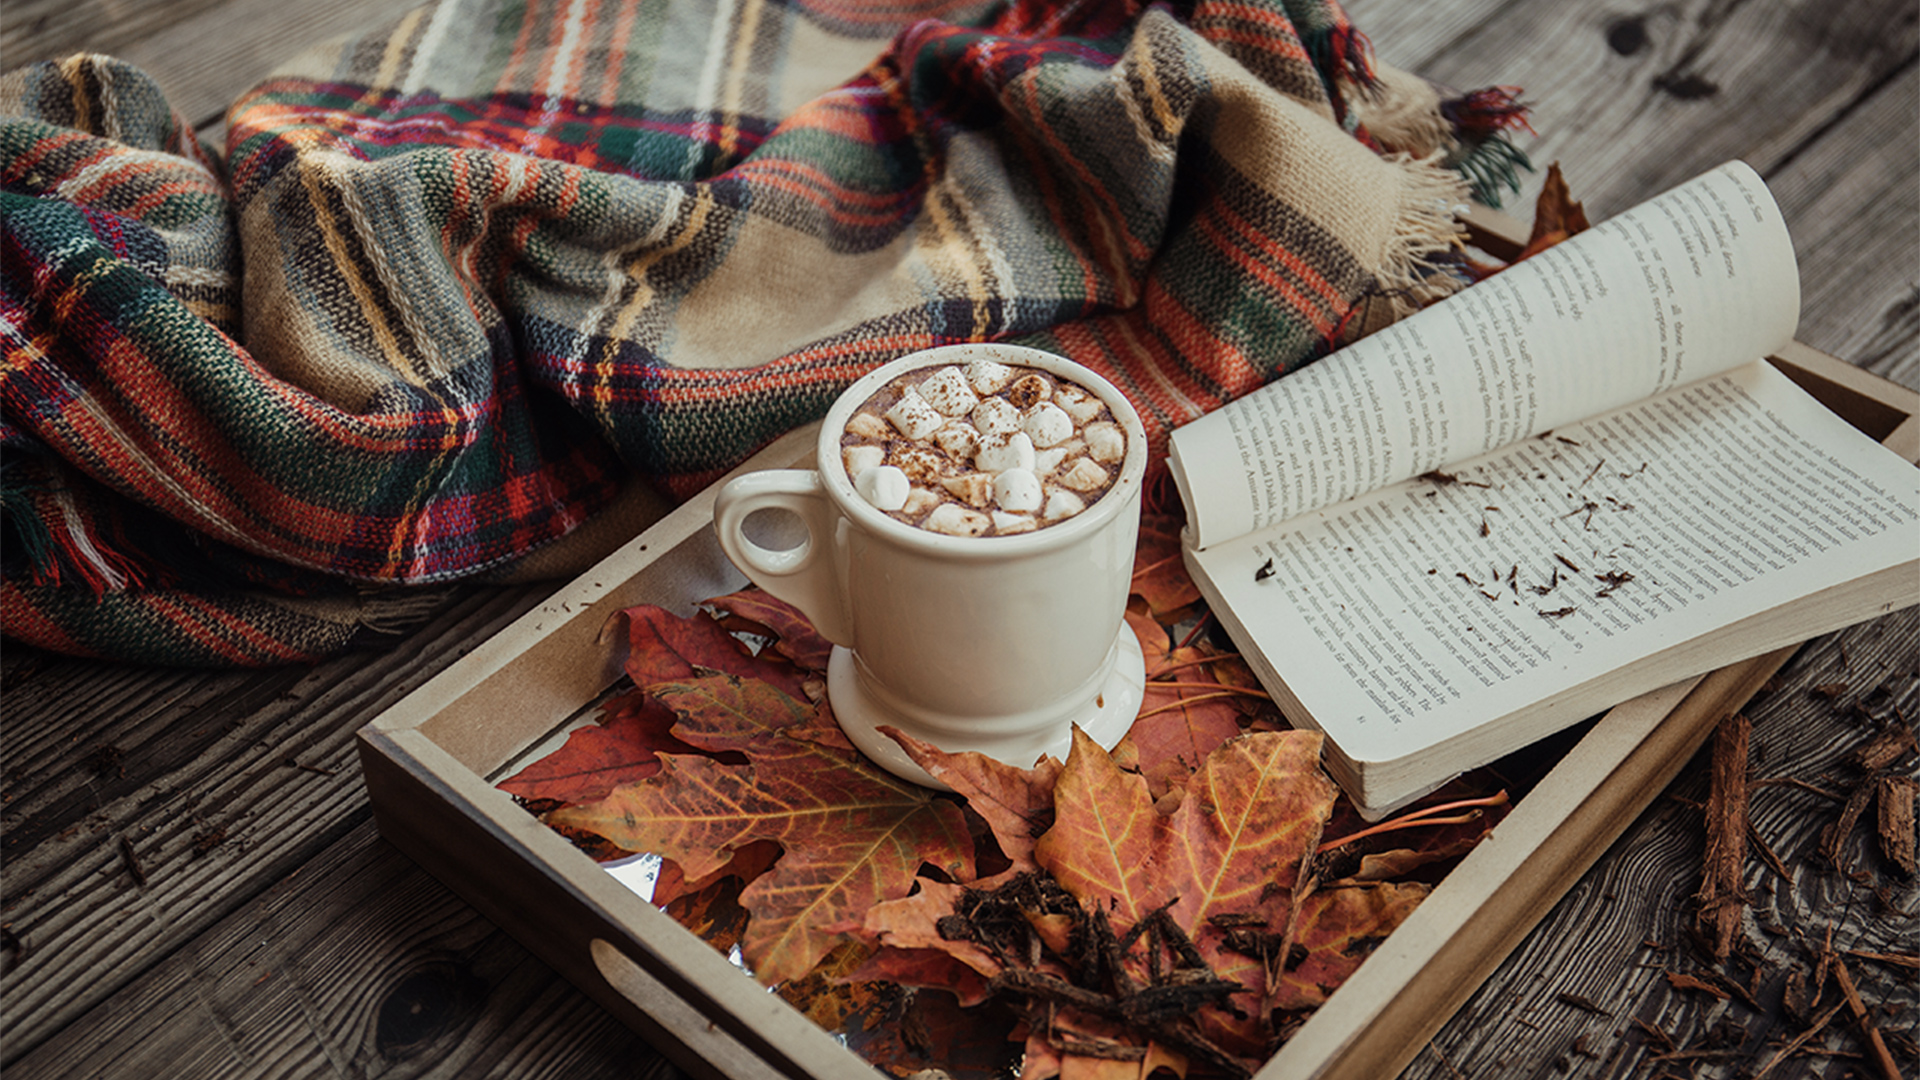 Mug of hot chocolate on a table with autumn leaves